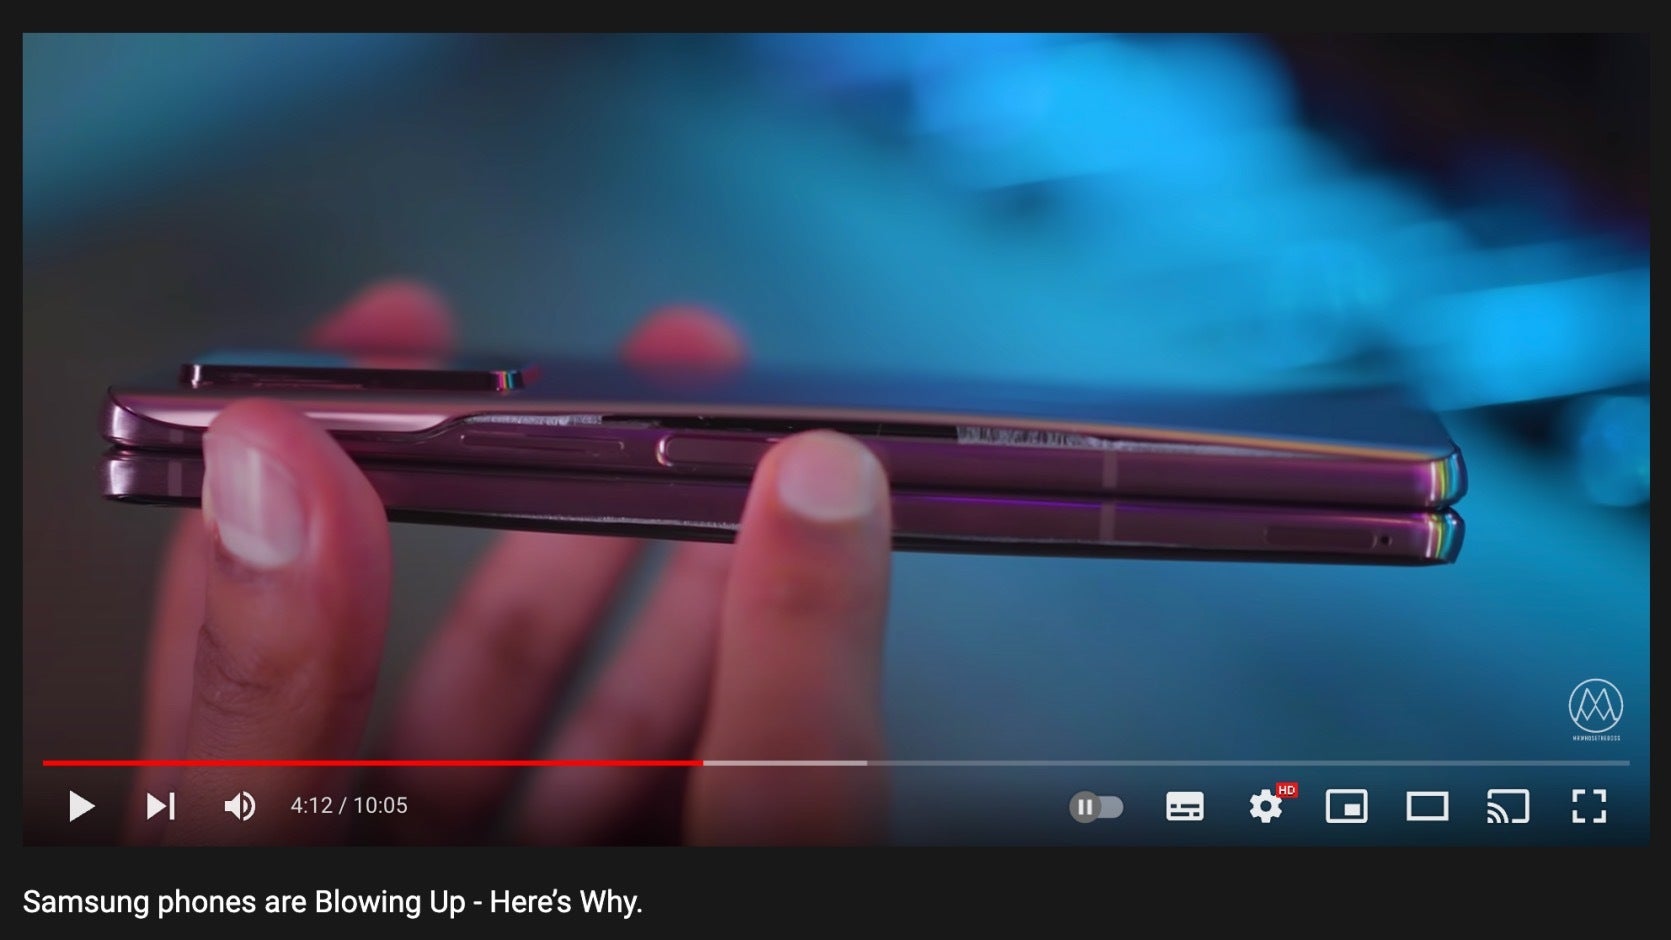 YouTube reacts. - Samsung phones blowing up at pandemic rates, urging return of removable batteries (Samsung responds)